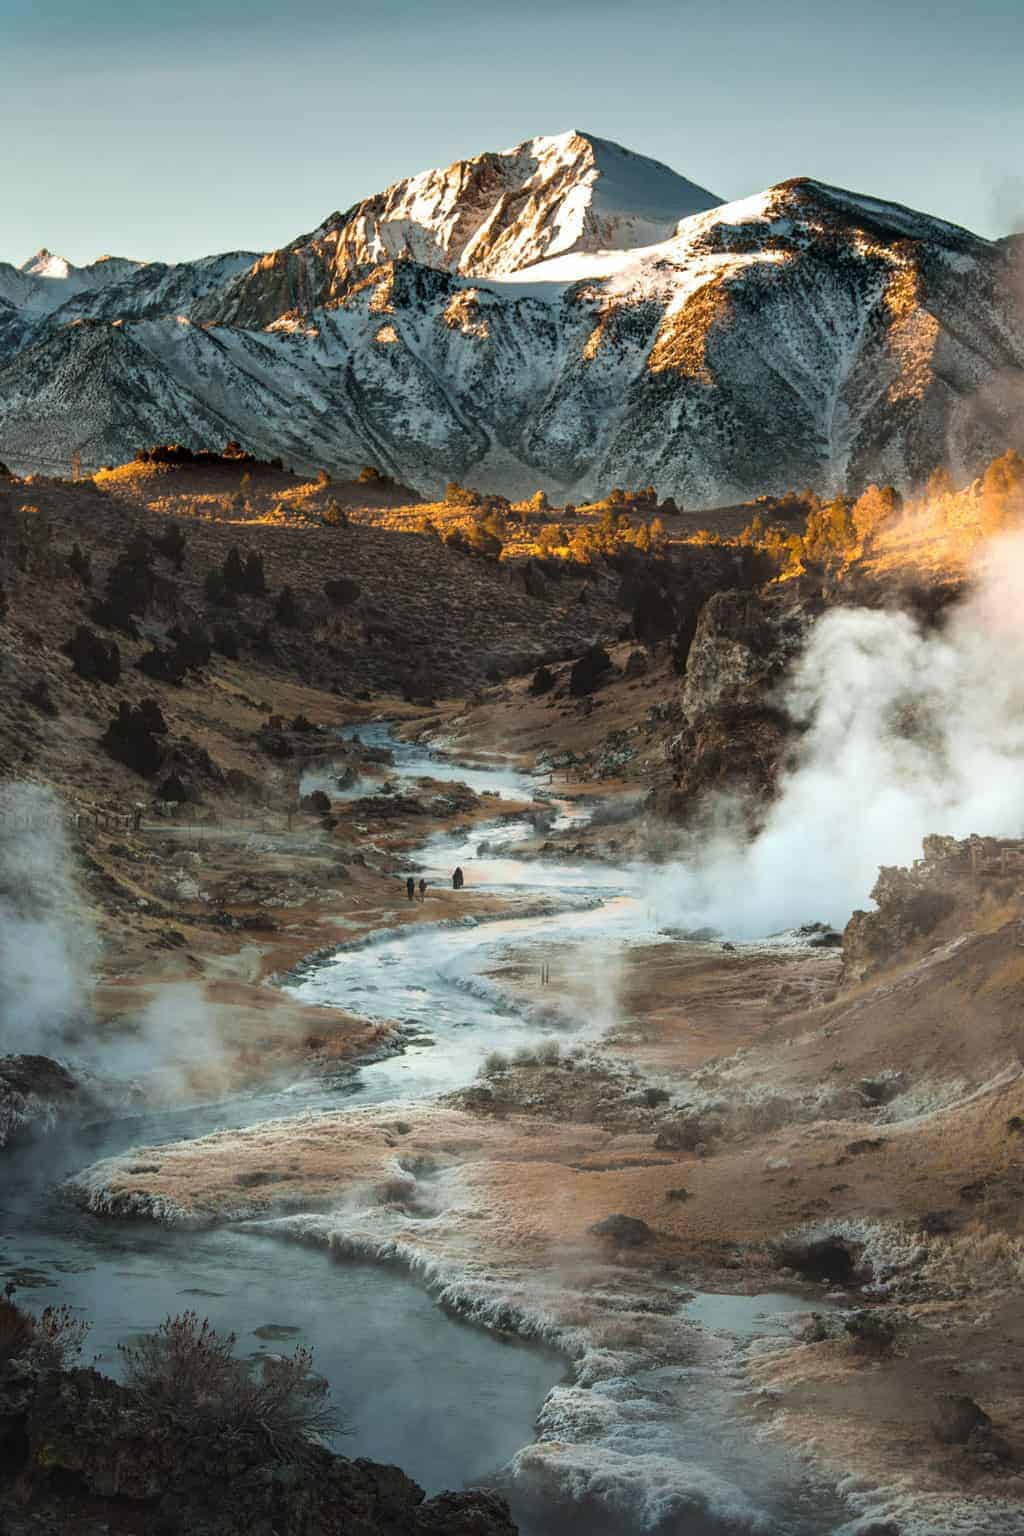 Snow capped mountains with a steaming geothermal river in the foreground.  